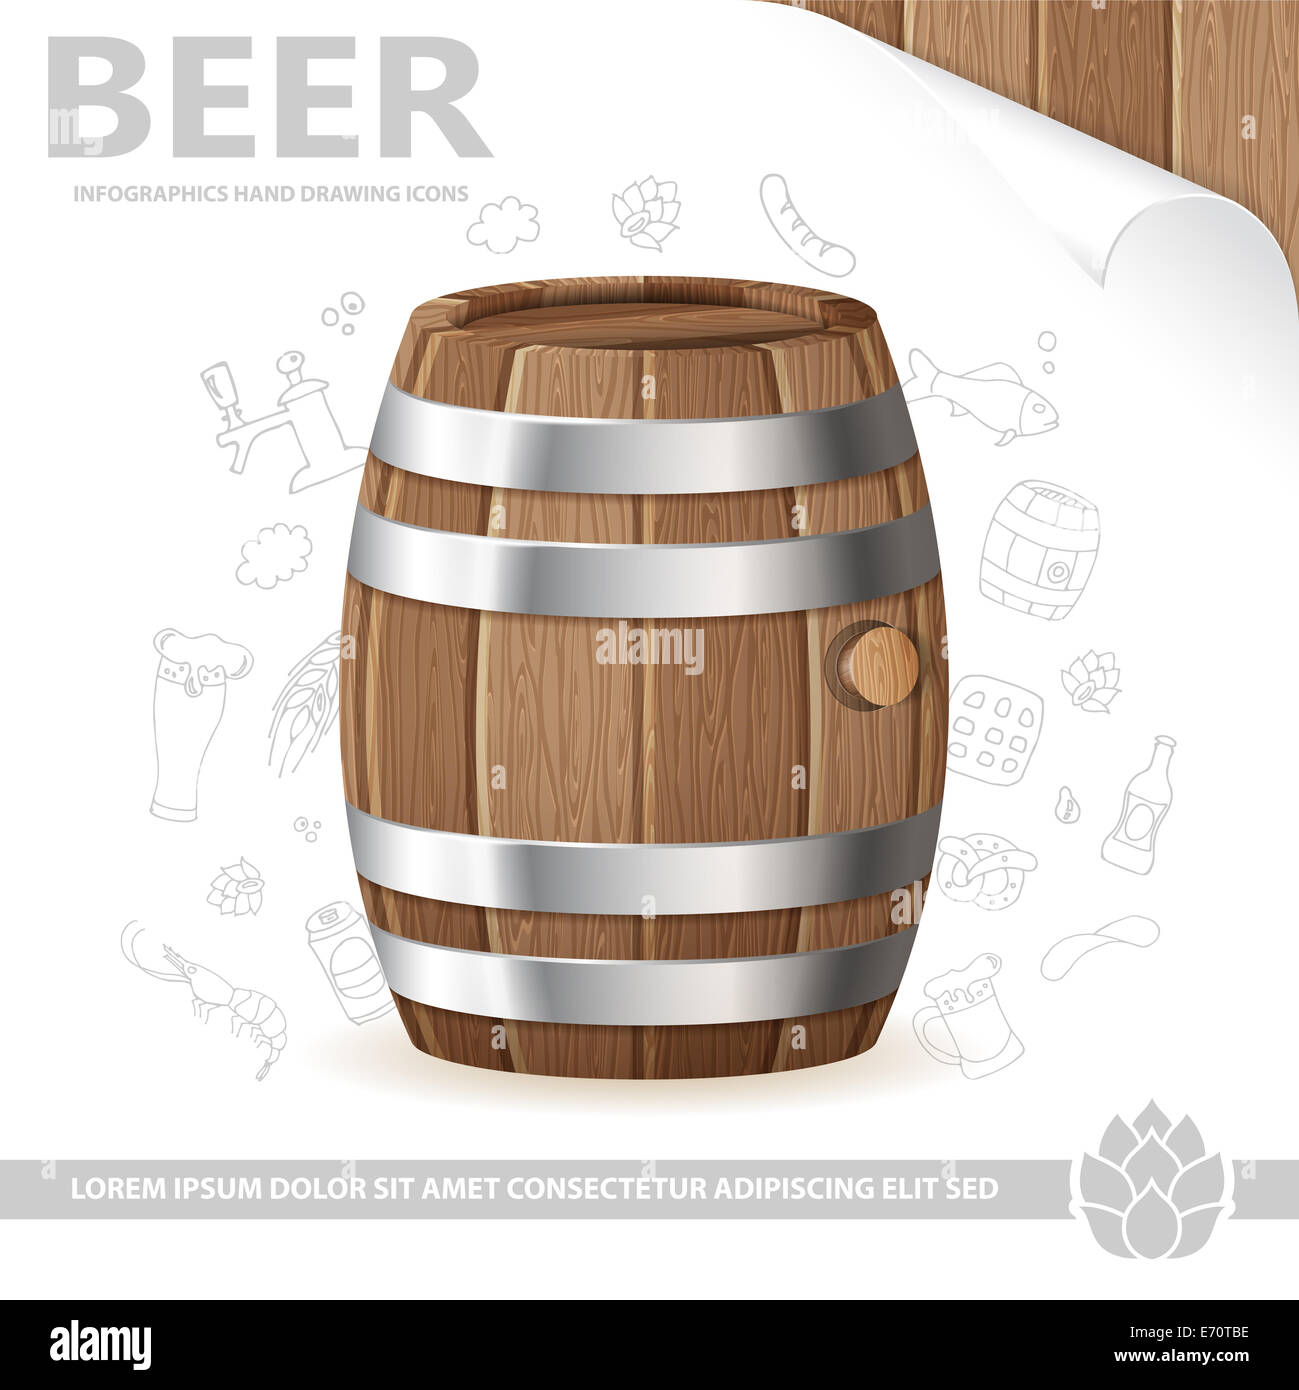 Beer Poster with Barrel of Beer, Sheet of White Paper and Hand Drawing Icon, isolated on white background Stock Photo